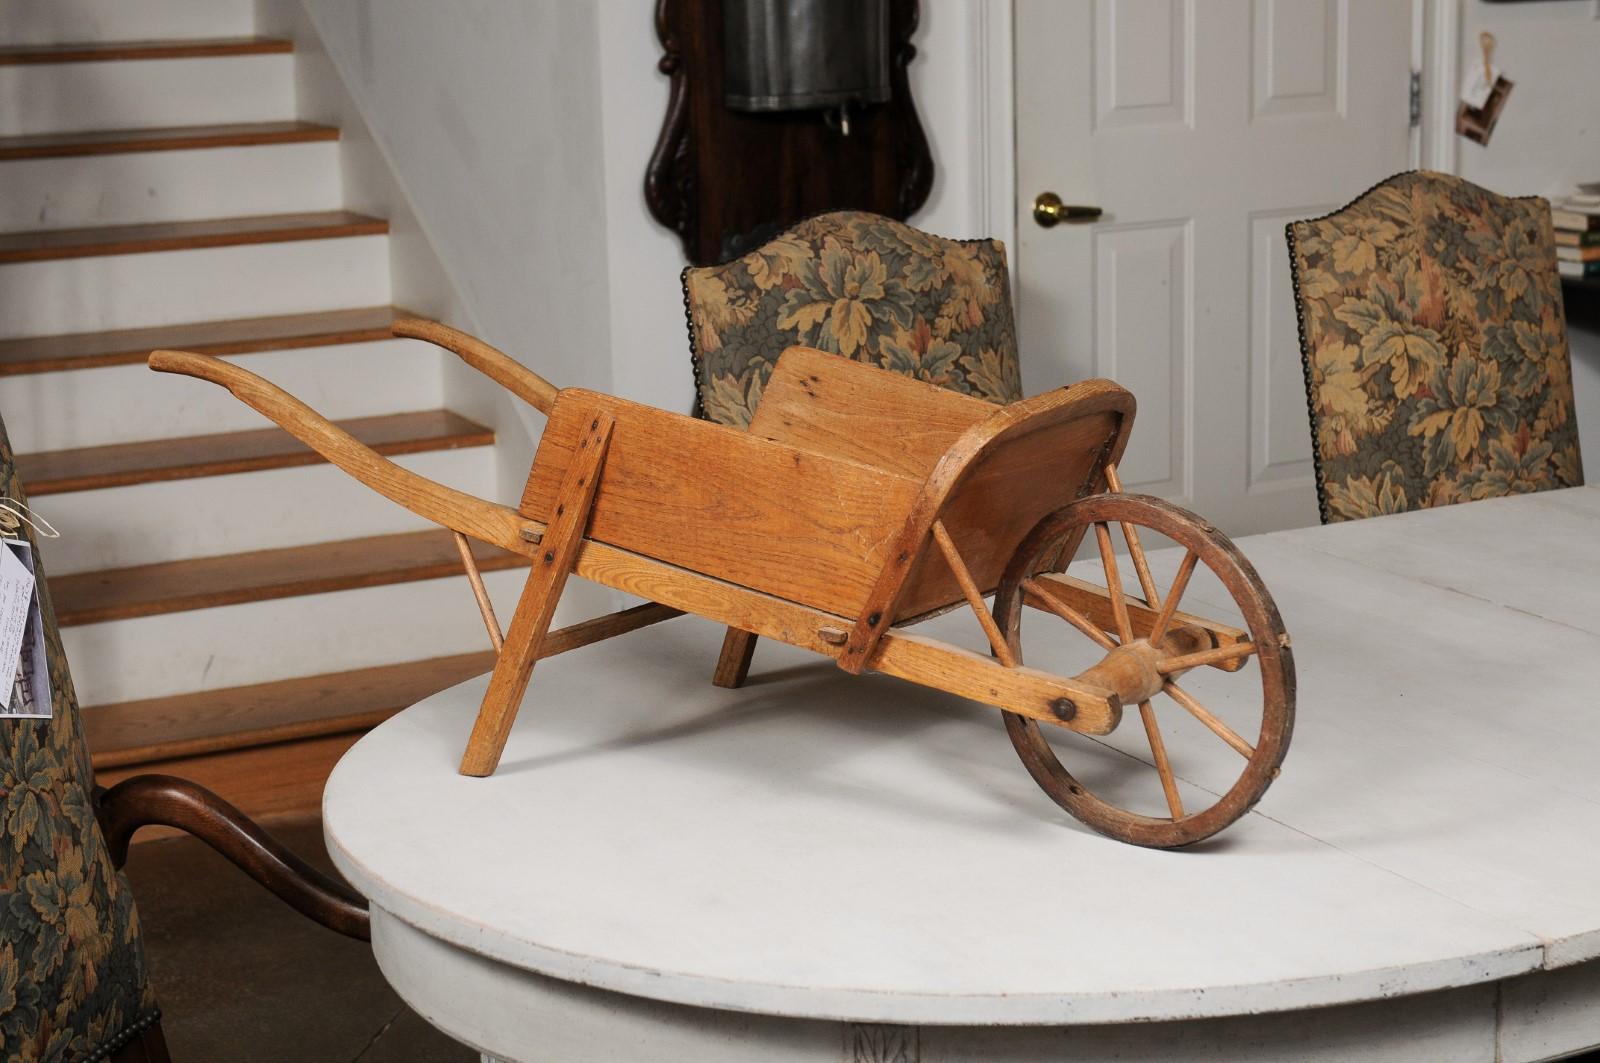 A French wooden child's wheelbarrow from the 19th century, with curving handles. Created in France during the 19th century, this petite wheelbarrow will make for an excellent addition to any child's room. Boasting a nicely rustic appearance, this